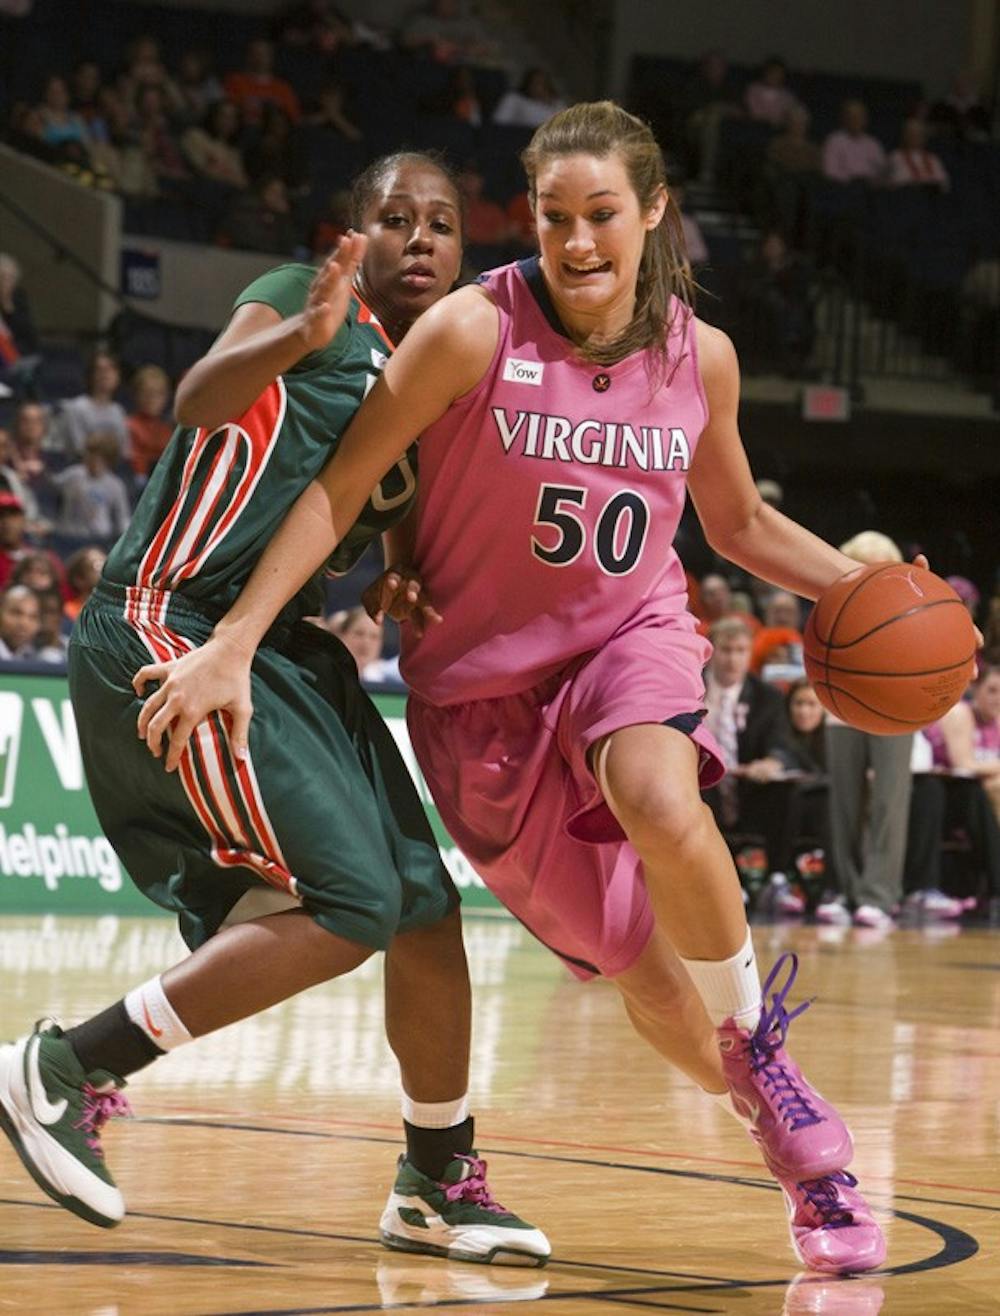 Virginia forward Chelsea Shine (50) in action against Miami.  The #21 ranked Virginia Cavaliers defeated the Miami Hurricanes 85-74 in overtime at the John Paul Jones Arena in Charlottesville, VA on February 19, 2009.